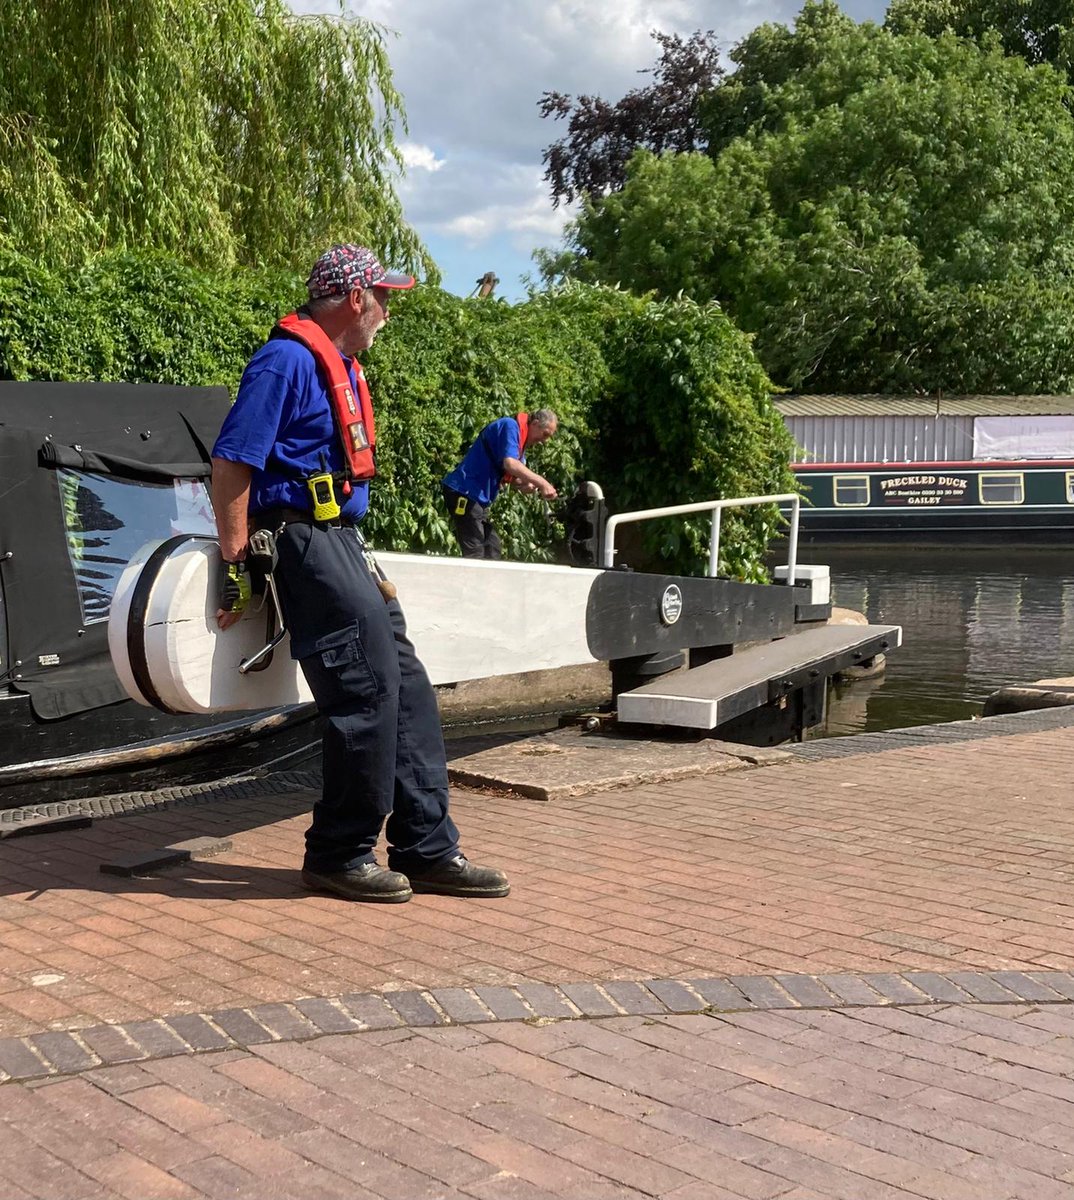 Great to spend time with the #Gailey #Lockkeepers completing some strimmer training & helping boats through the #lock 
#ThankYou 
#VolunteerByWater 
#MakingLifeBetterByWater
@CRTWestMidlands 
@CRTvolunteers